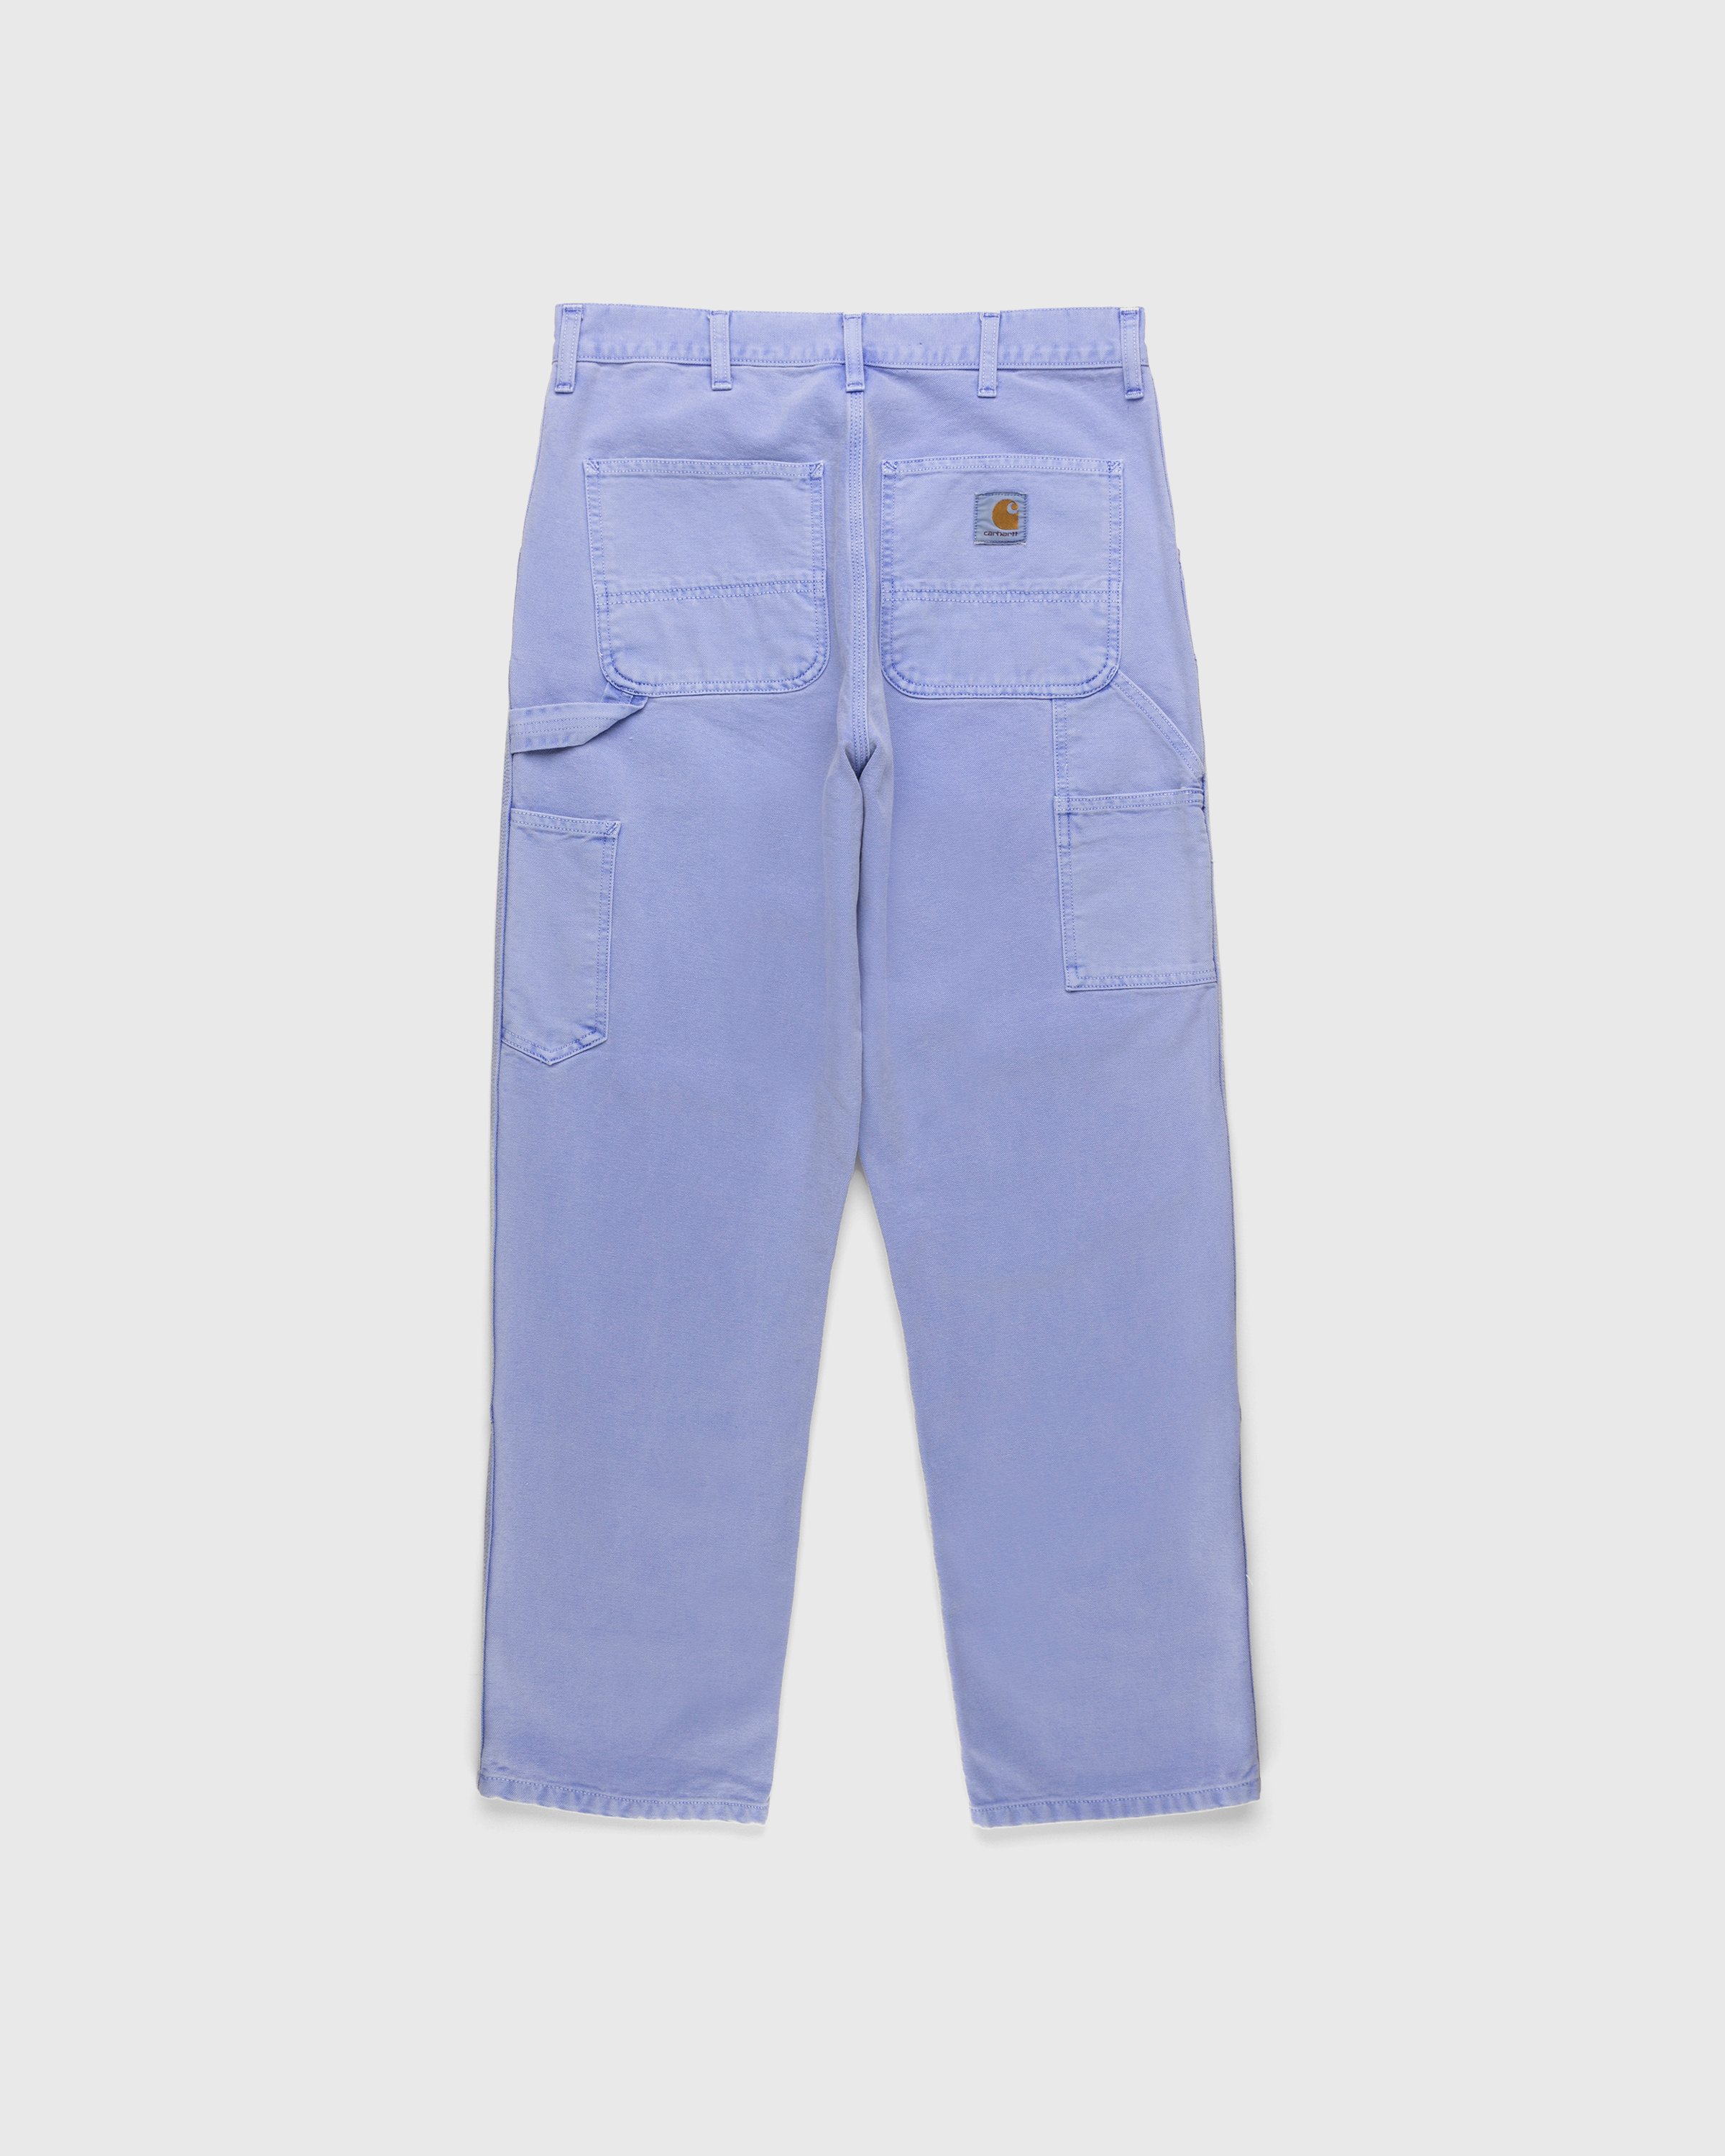 Carhartt WIP - Double Knee Pant Icy Water Faded - Clothing - Blue - Image 2